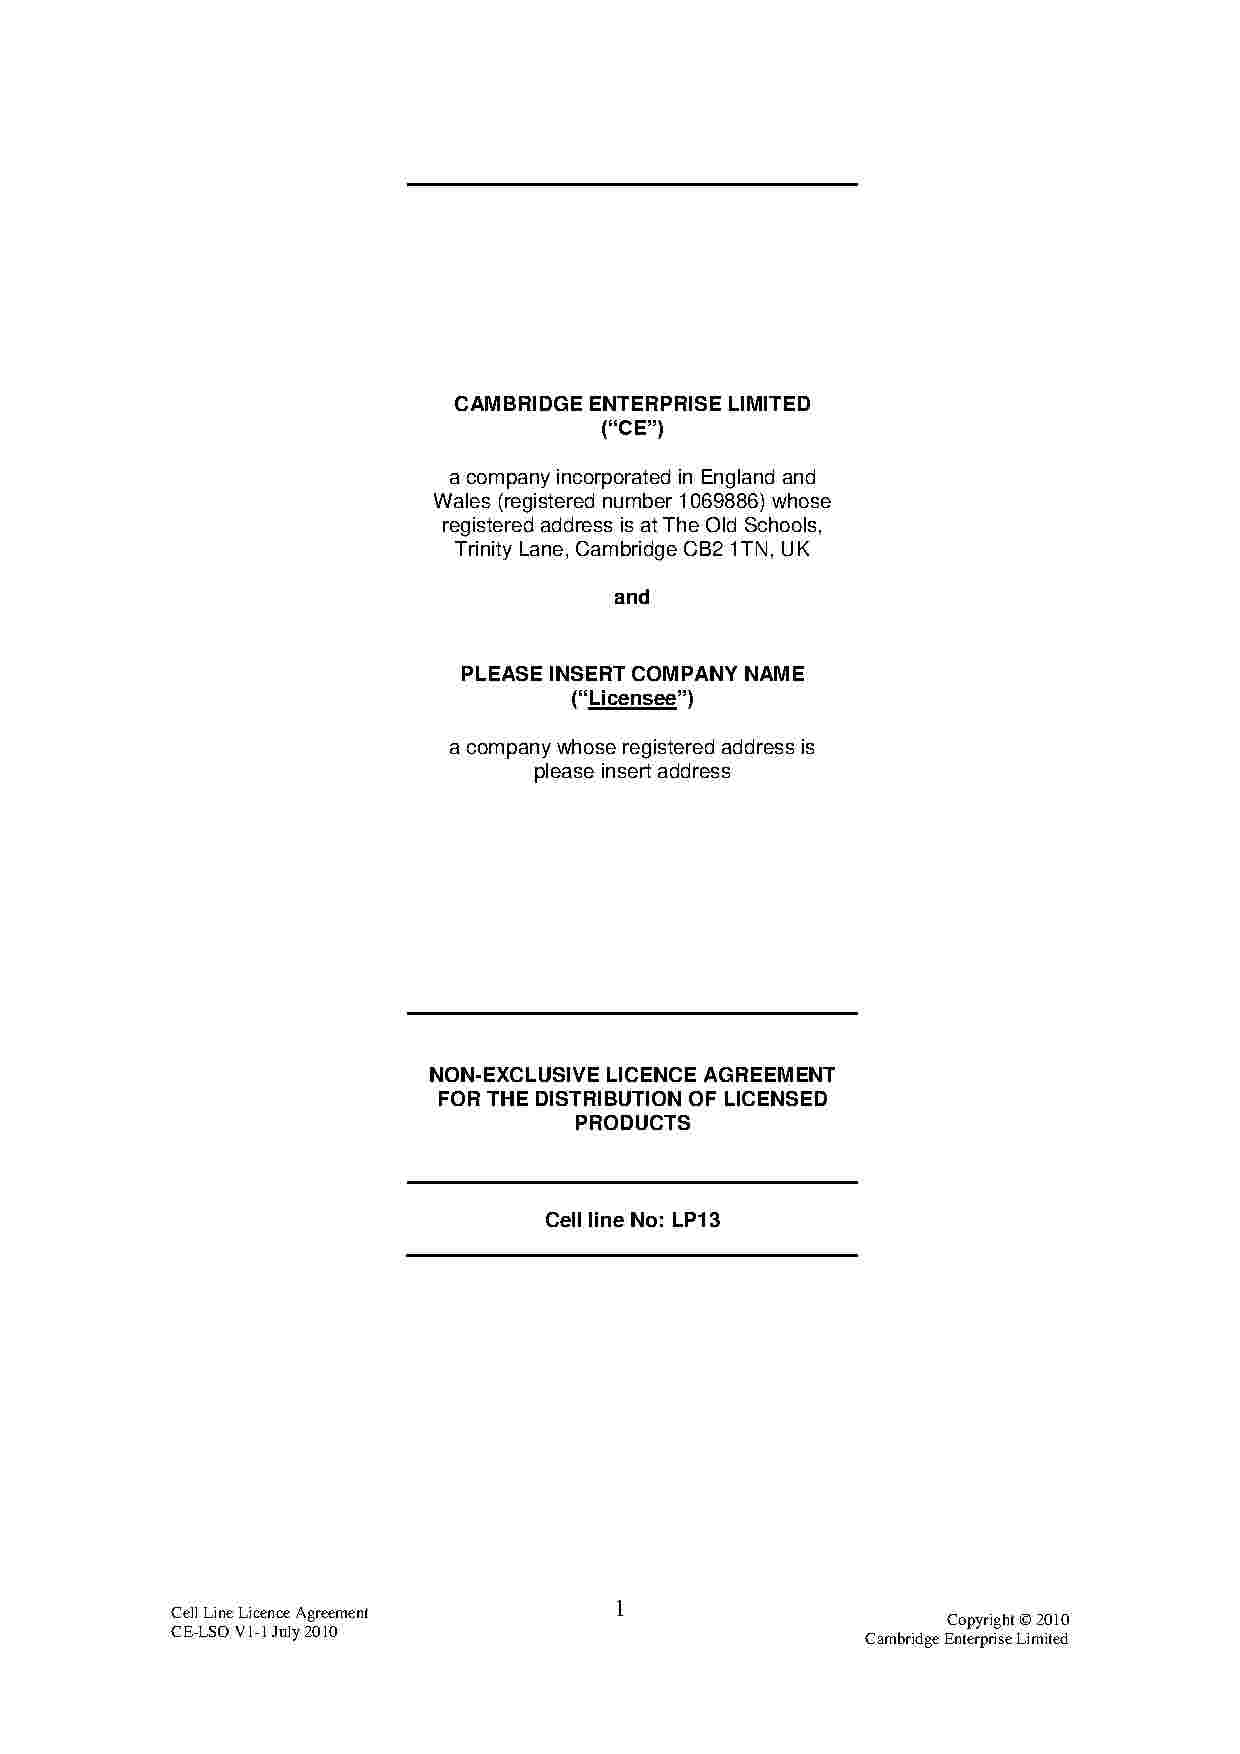 Enterprise License Agreement Download Manufacturing License Agreement Style 12 Template For Free